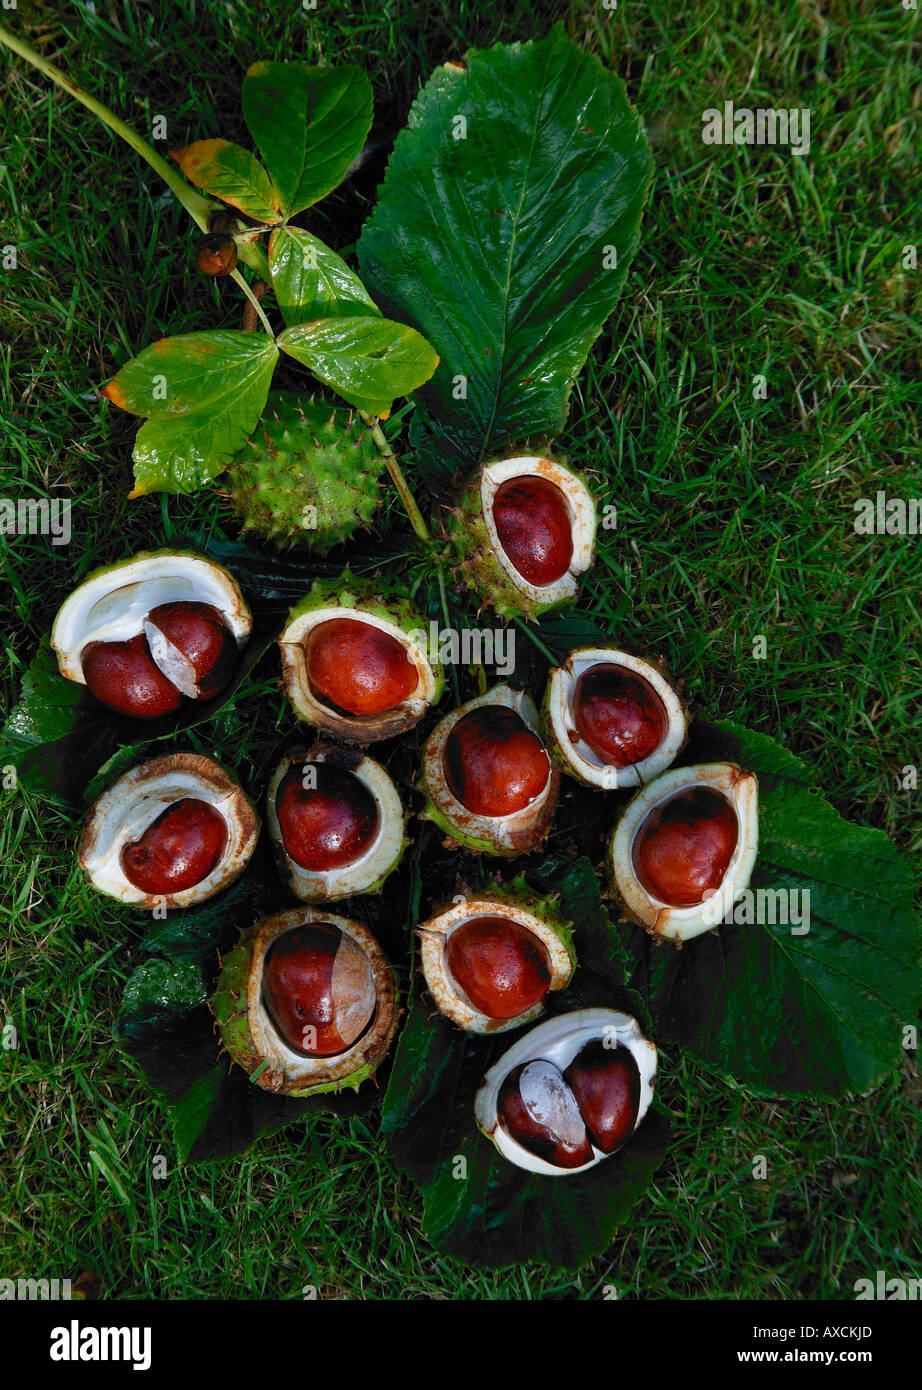 A group of horsechestnuts in their shells with leaves and stalk lying on grass, gathered from the Aesculus hippocastanum tree Stock Photo